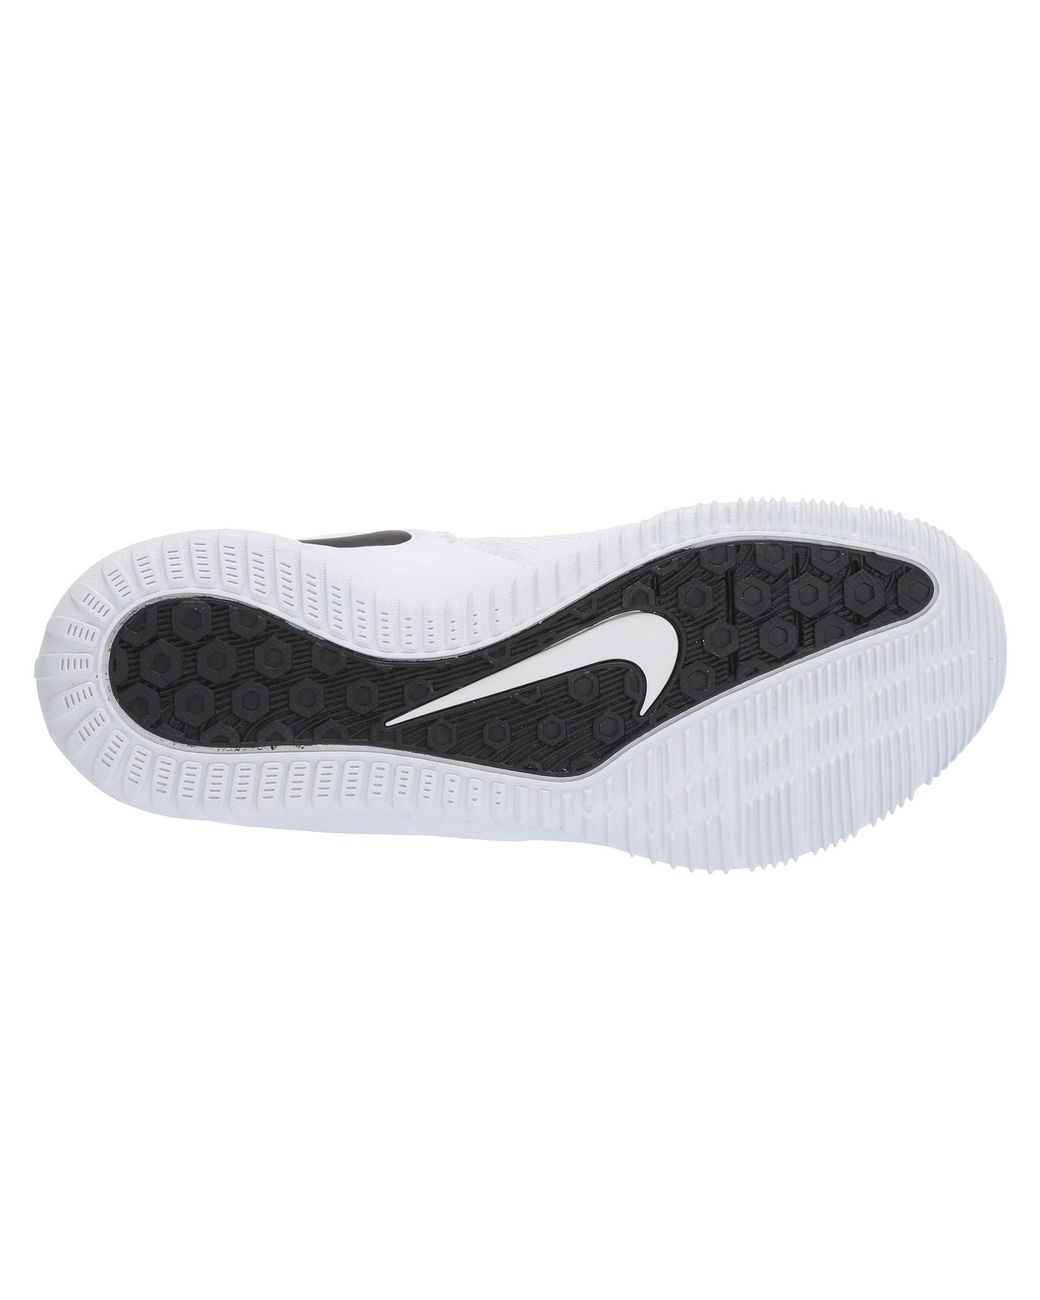 Nike Zoom Hyperace 2 - Volleyball Shoes in White | Lyst